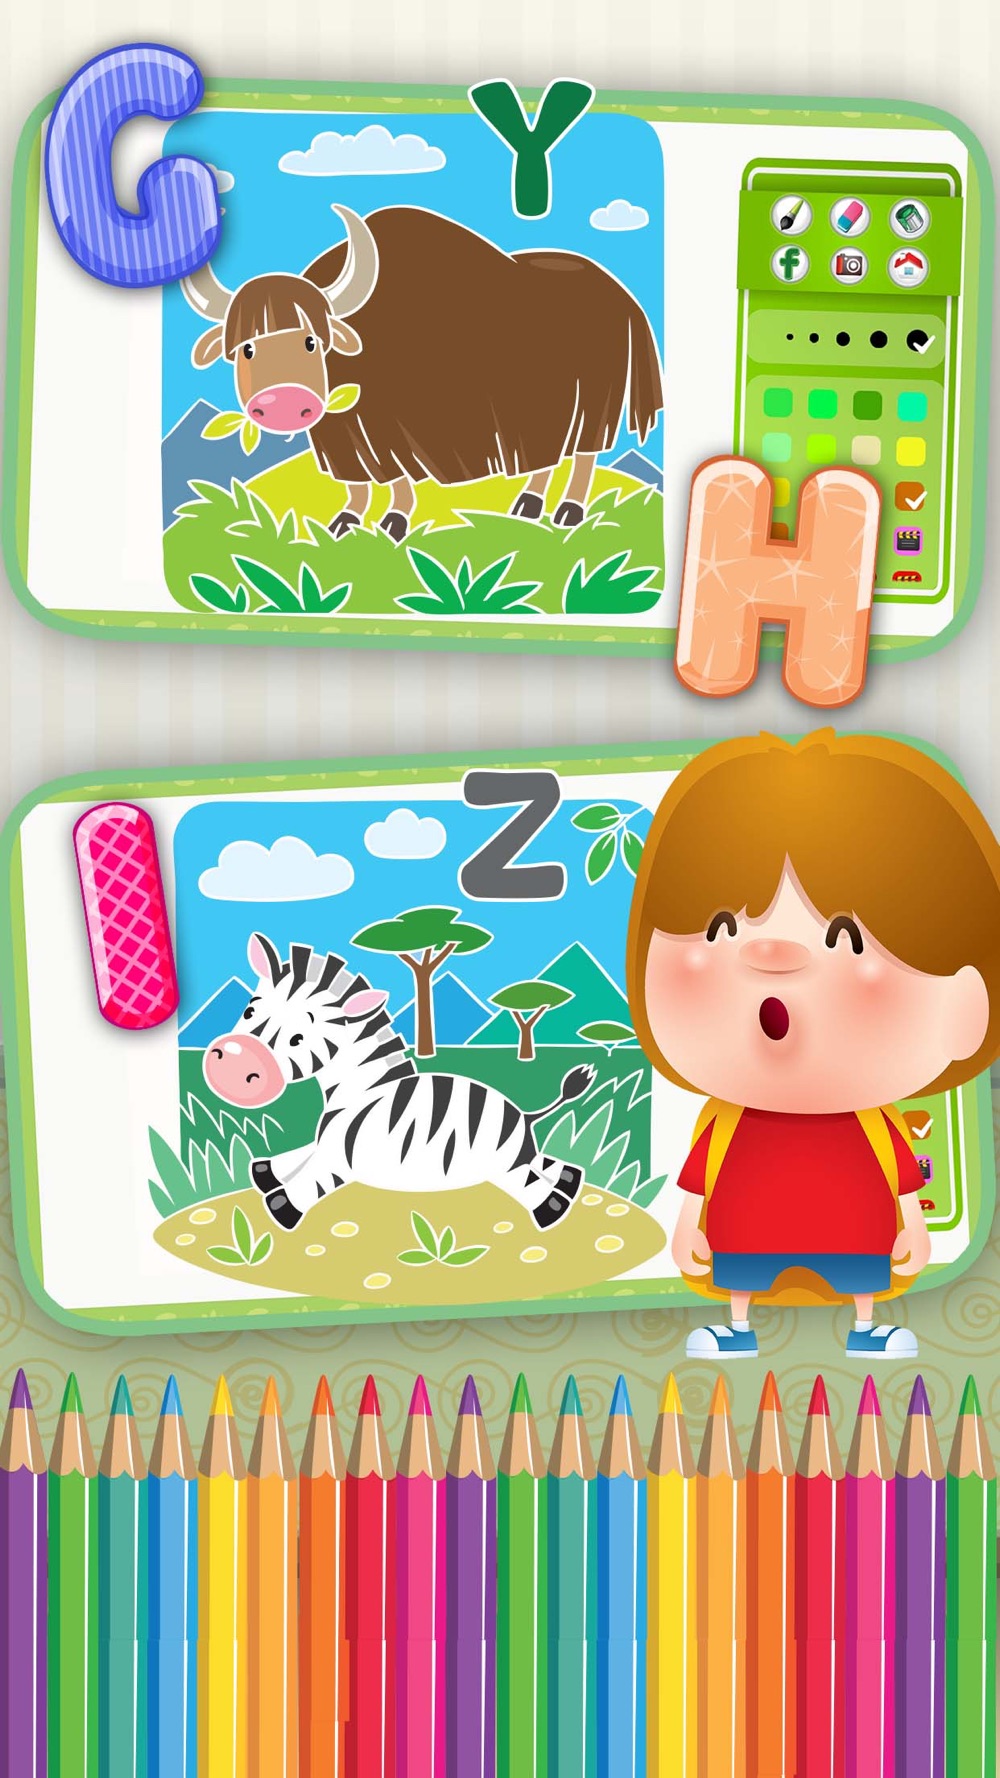 Abc 動物 塗り絵 ゲーム ため 幼児 子供 Free Download App For Iphone Steprimo Com